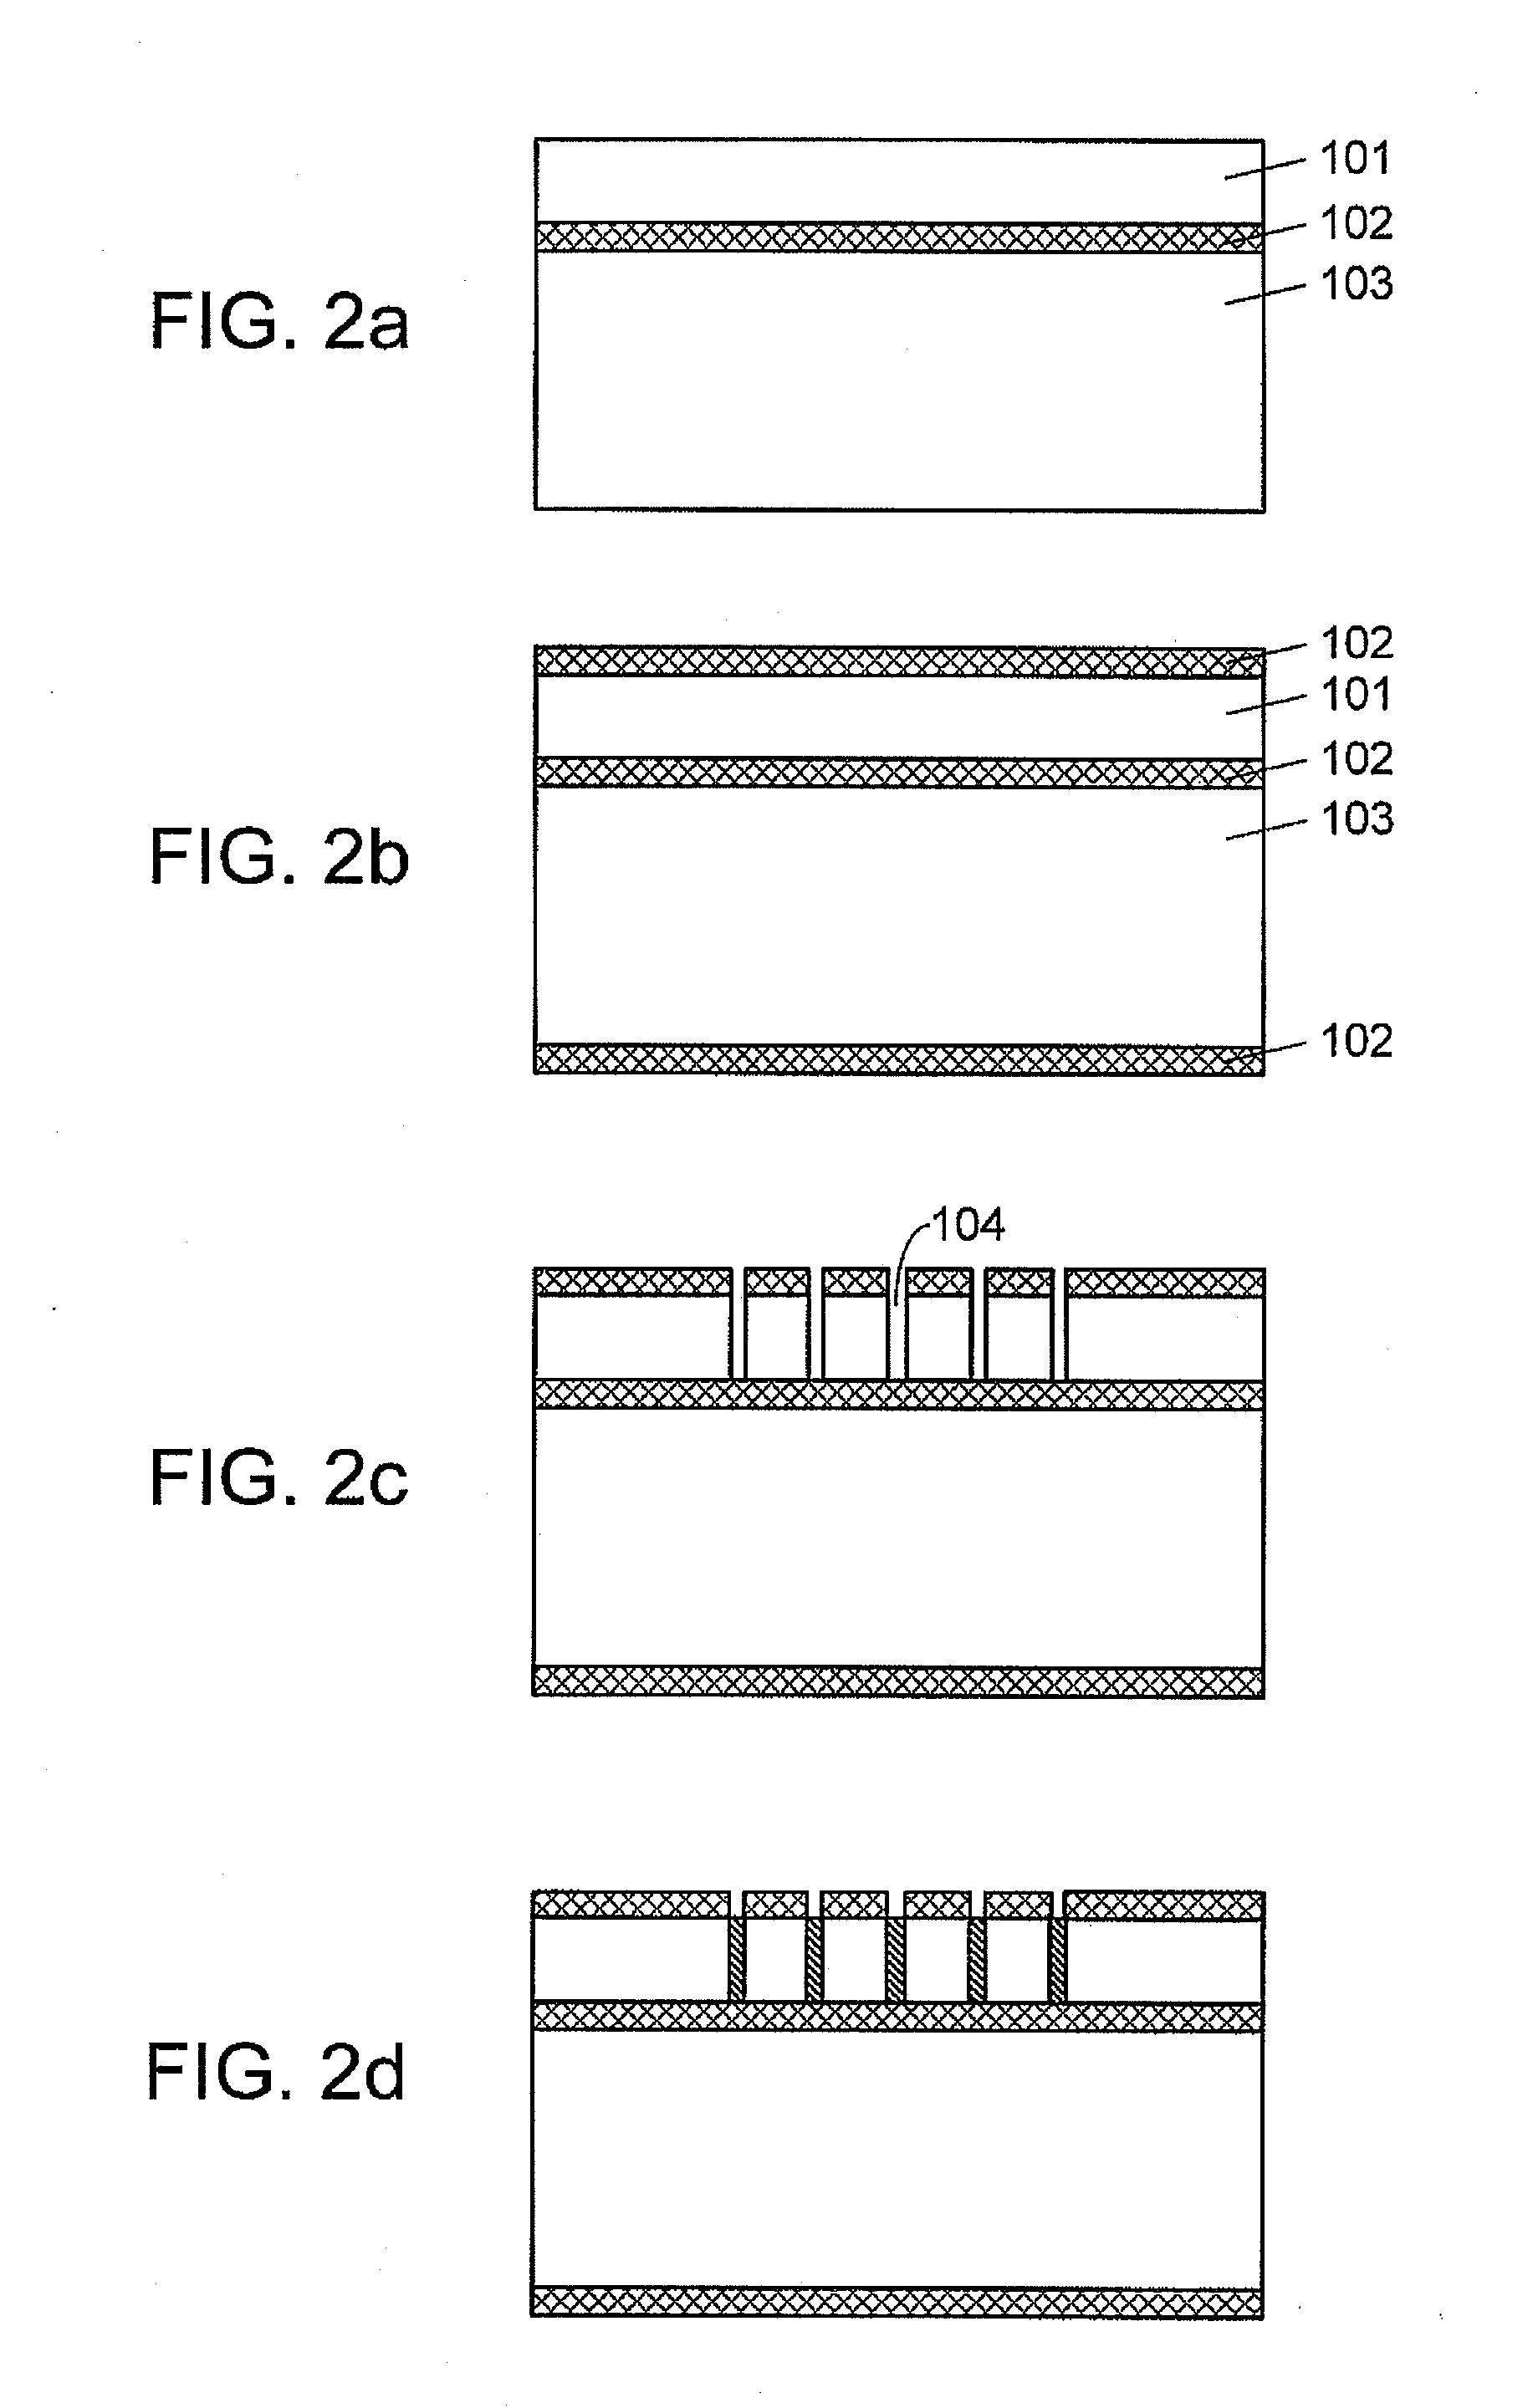 Radiation detector, method of manufacturing a radiation detector and use of the detector for measuring radiation